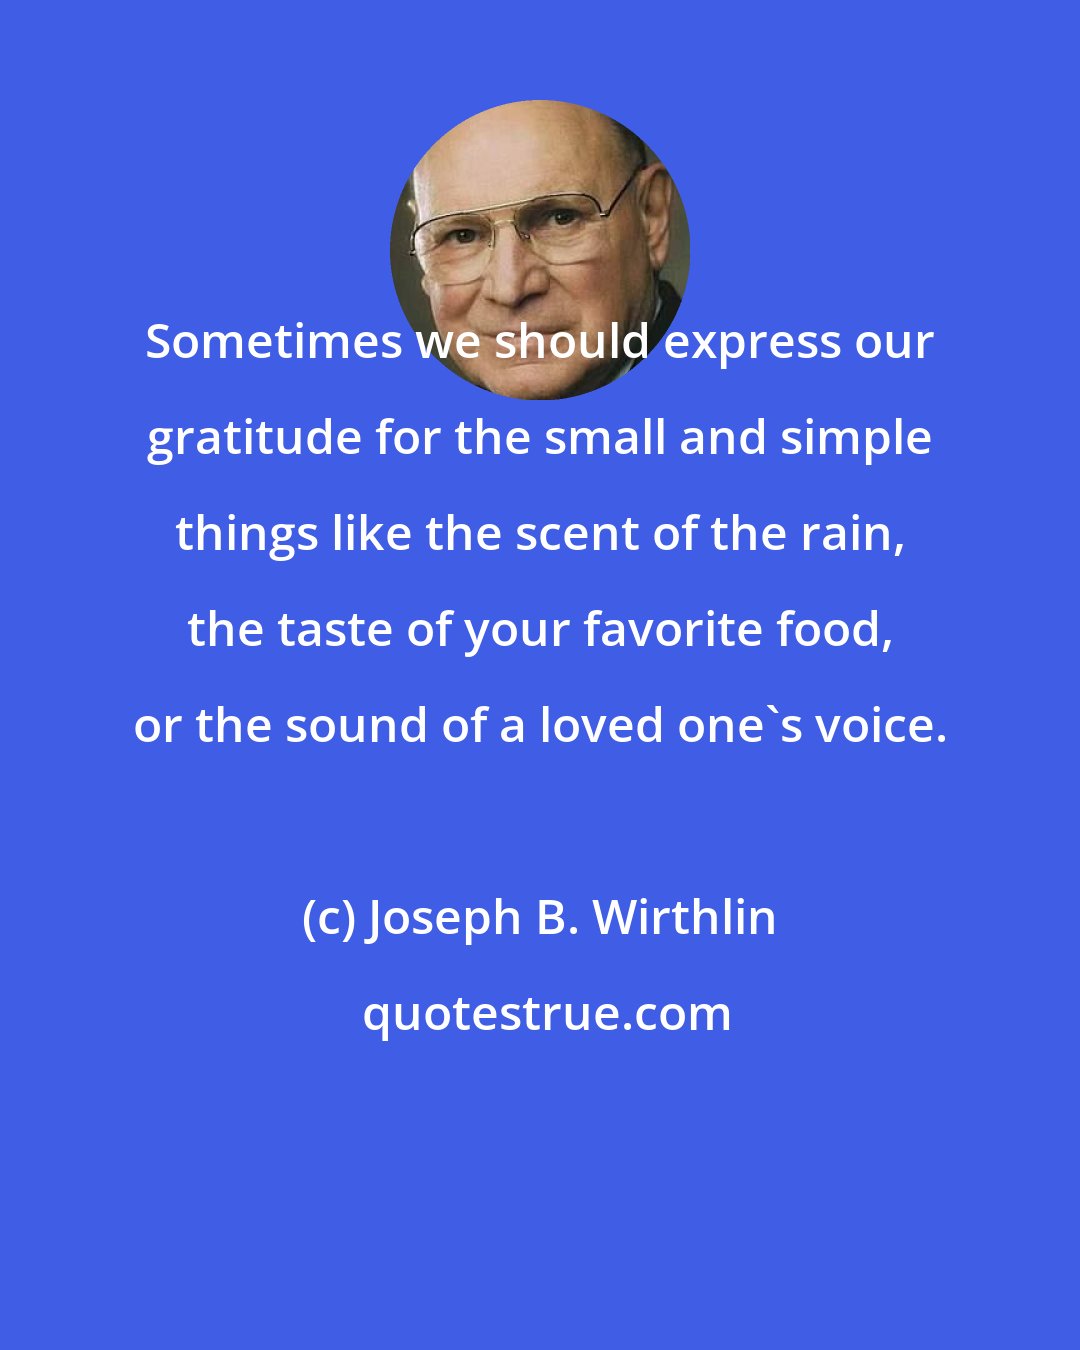 Joseph B. Wirthlin: Sometimes we should express our gratitude for the small and simple things like the scent of the rain, the taste of your favorite food, or the sound of a loved one's voice.